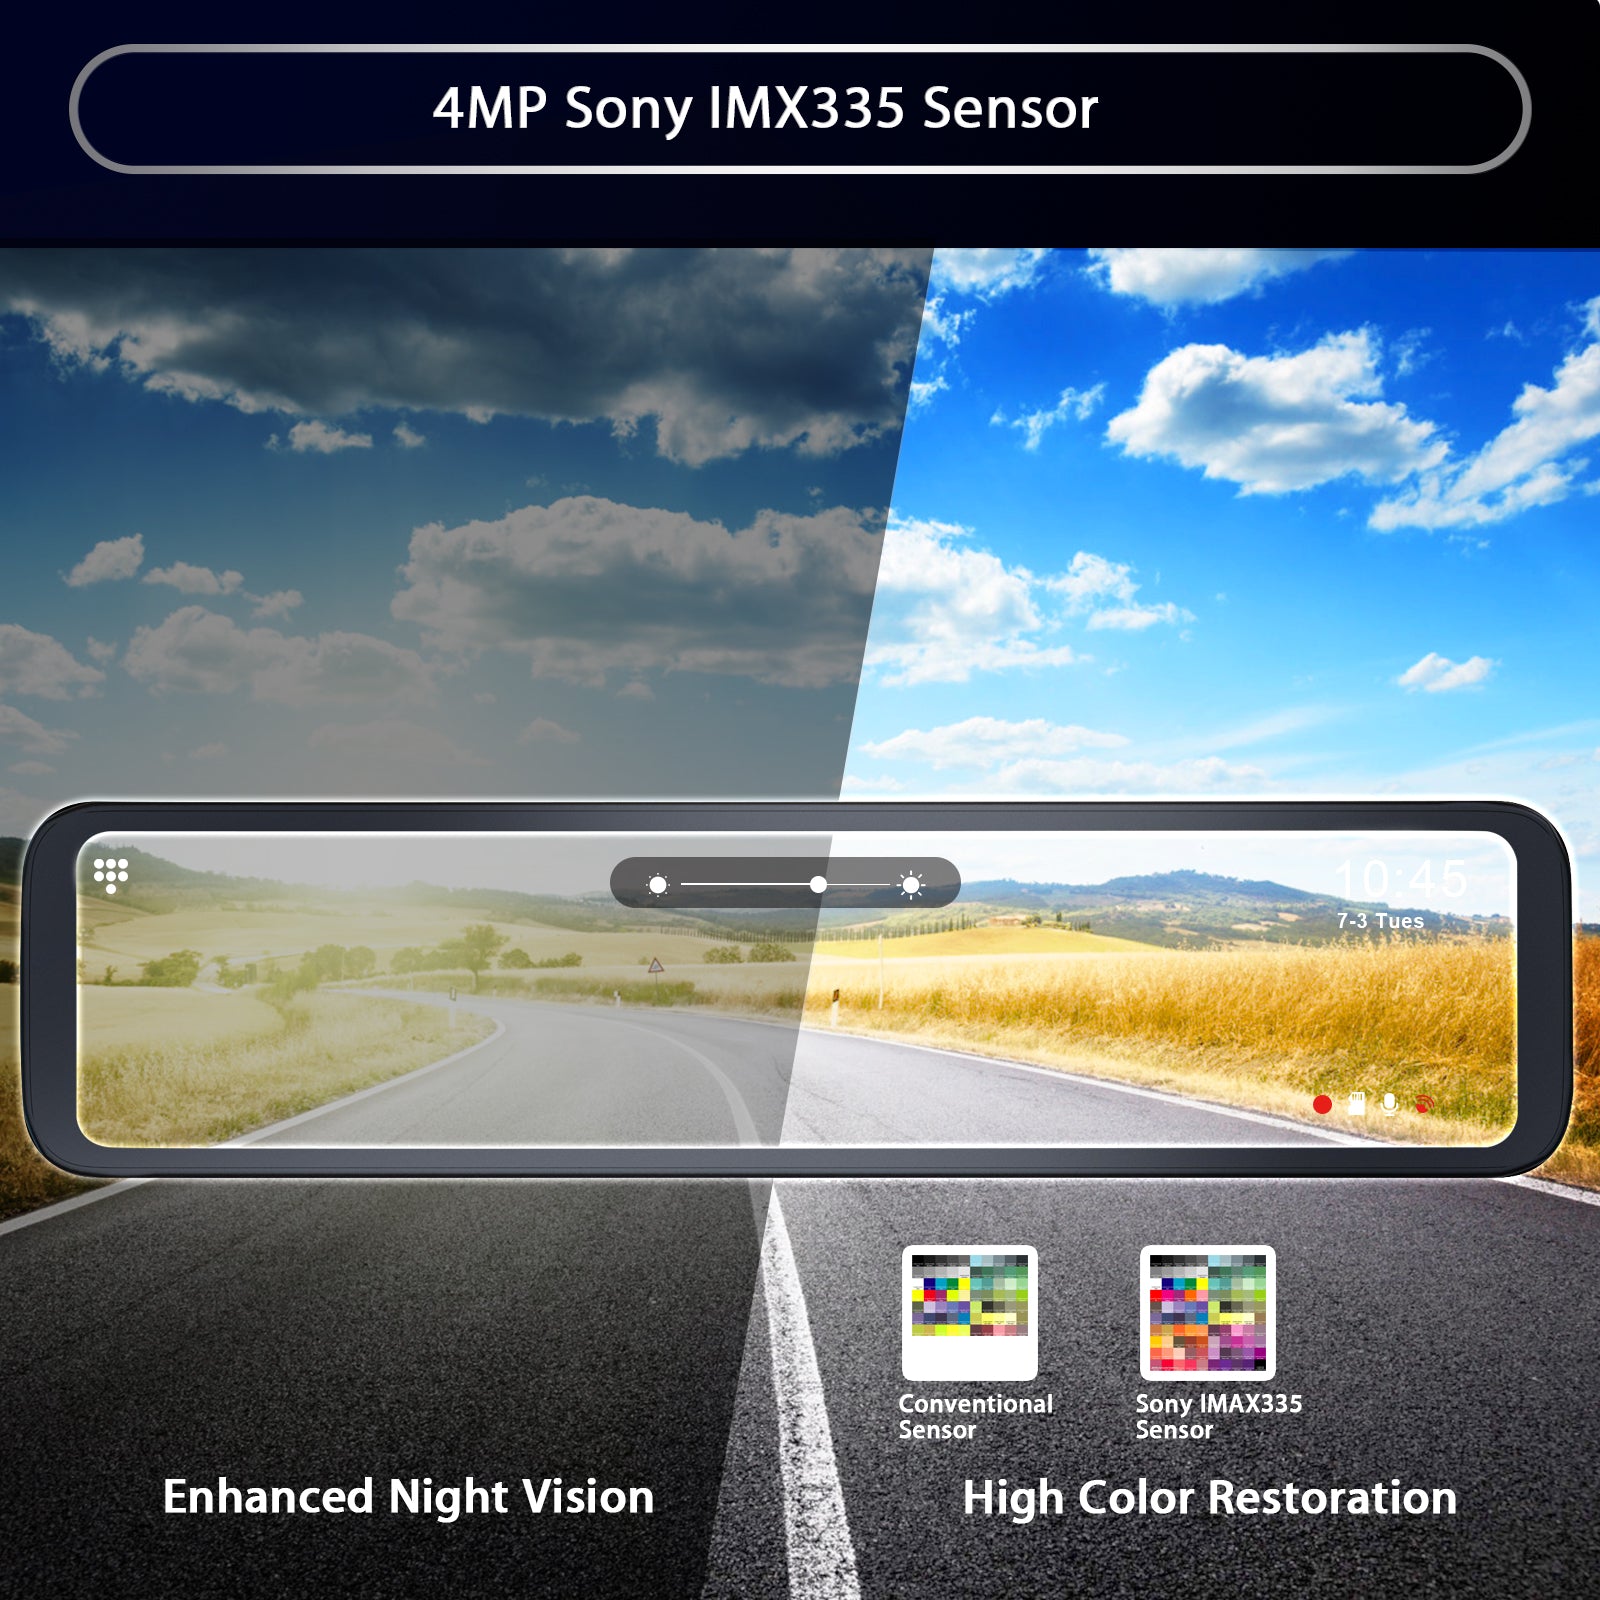 4MP Sony IMX335 sensor enhances night vision and color reproduction in this car projector. 